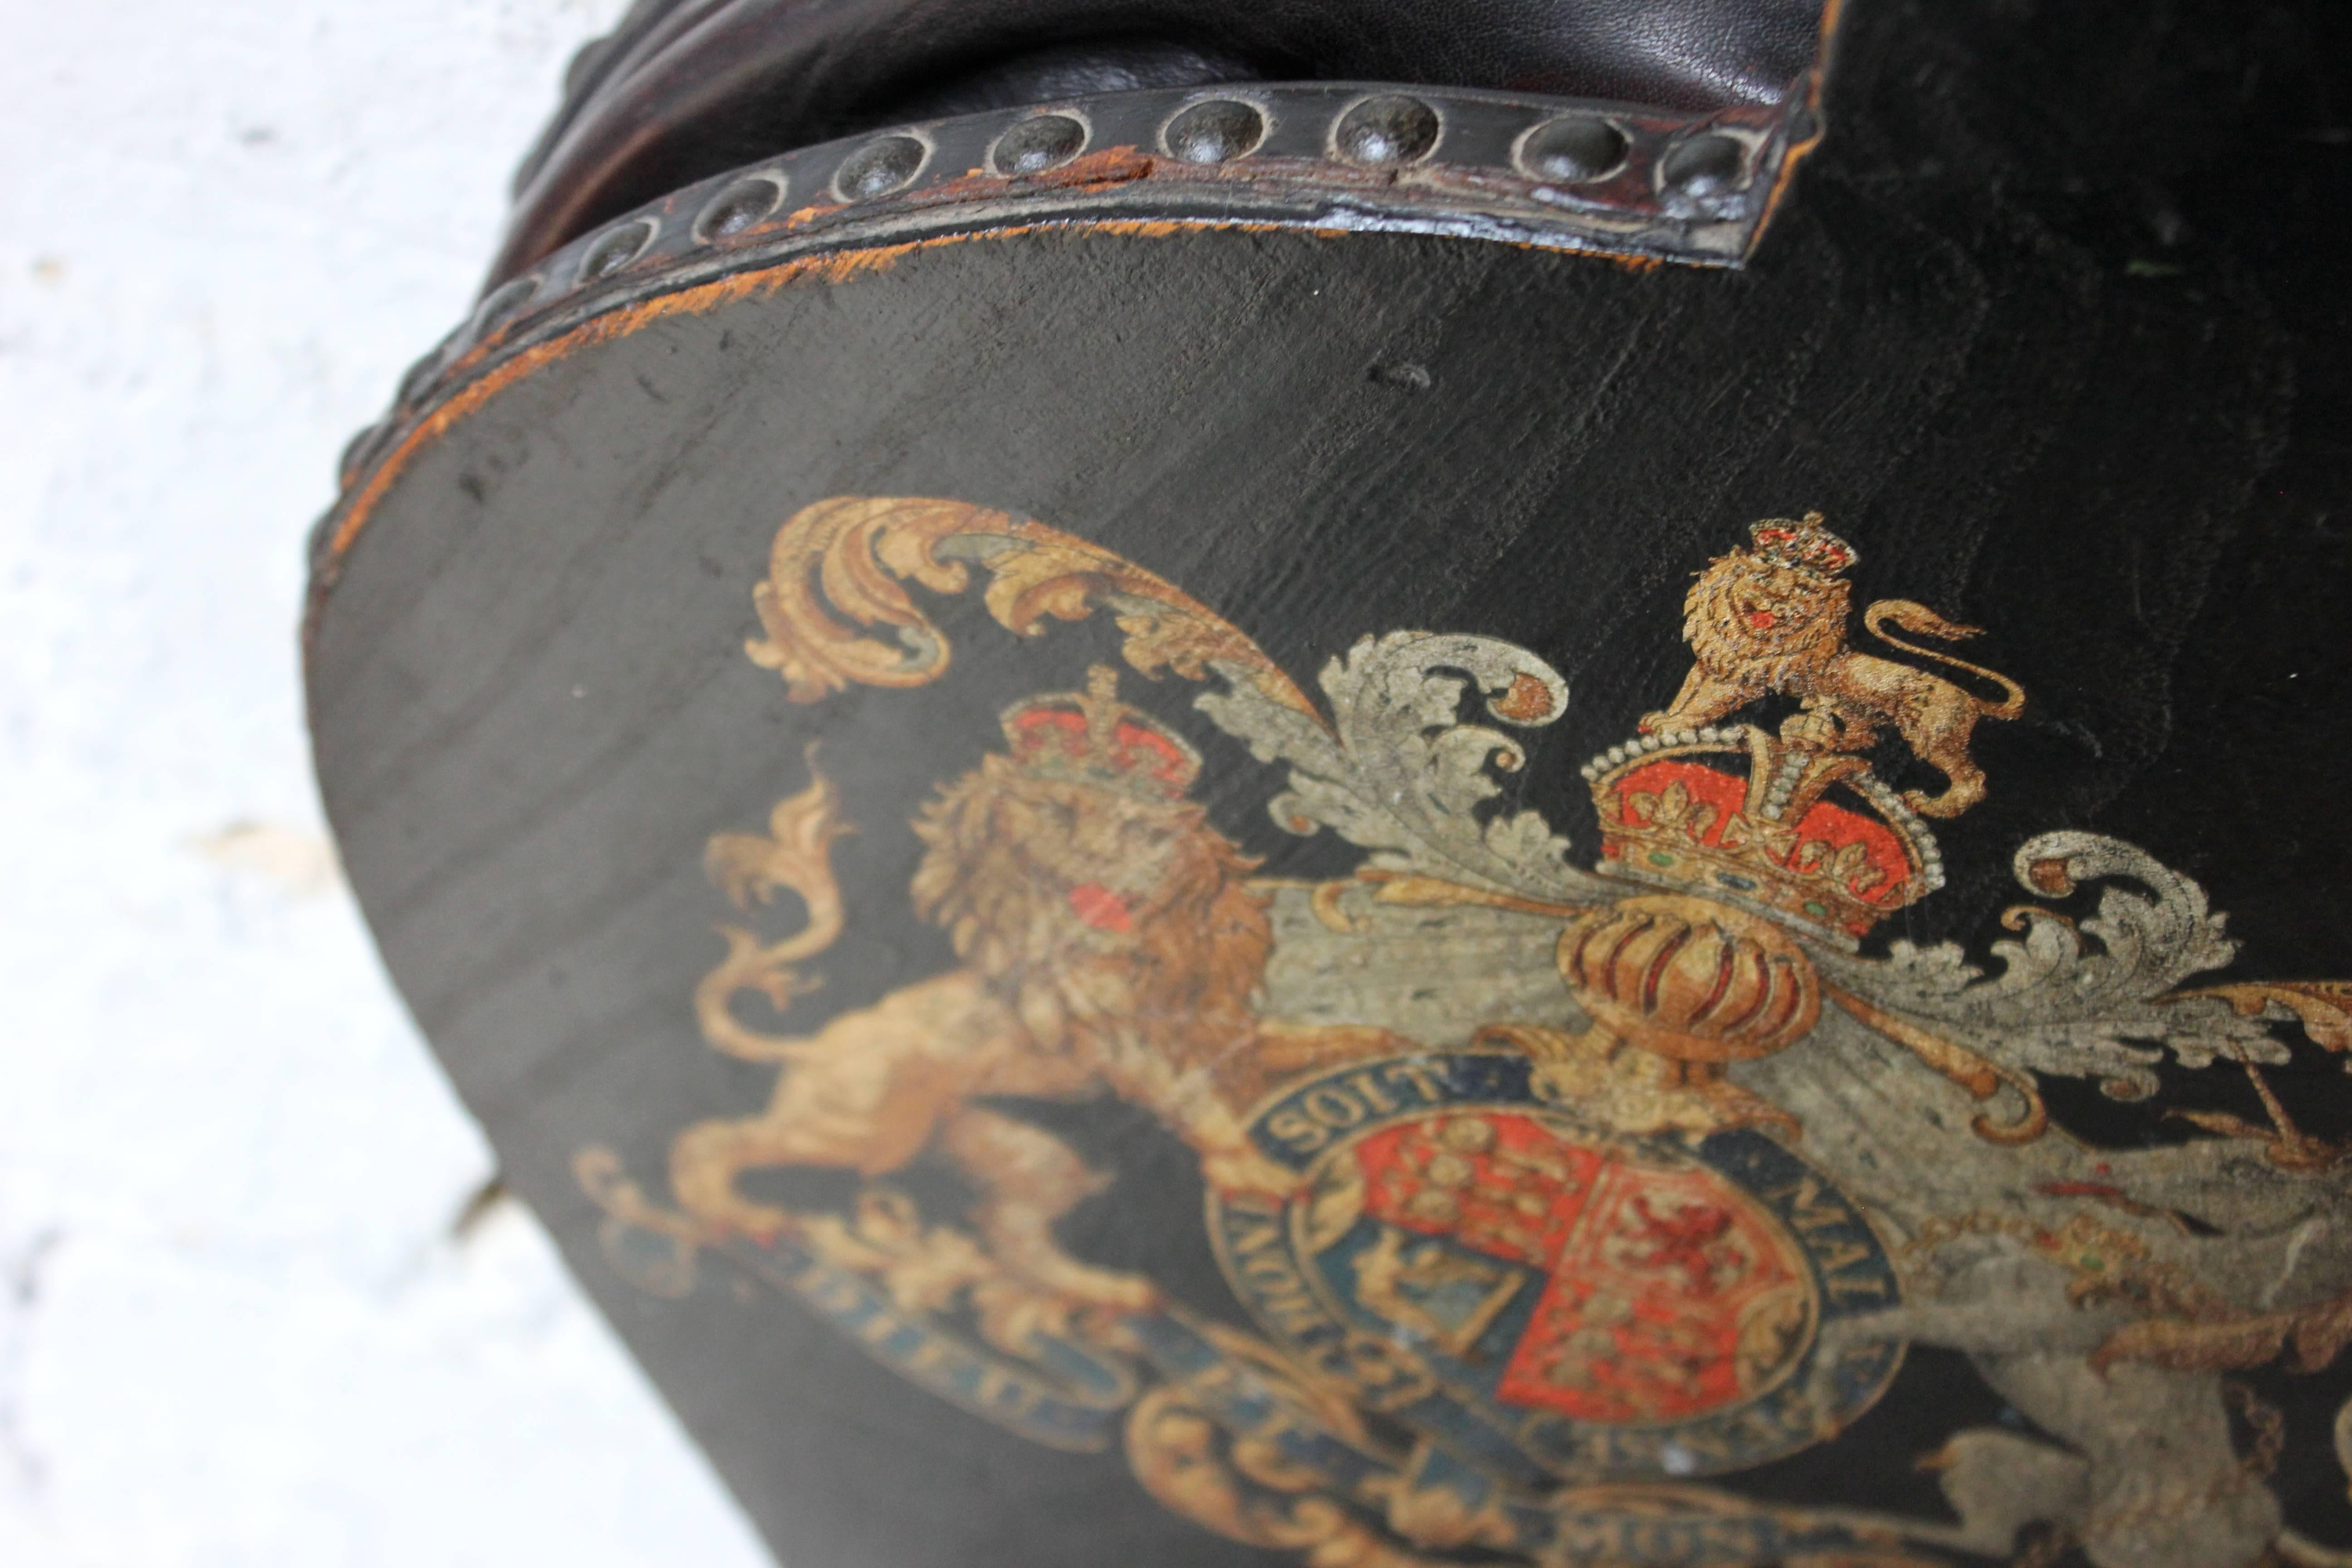 The Victorian period hand-painted and studded leather bound wooden pair of bellows of typical form with iron nozzle, the main body beautifully decorated with a polychrome Royal Coat of Arms Cypher on a black ground, now acting as a decorative piece